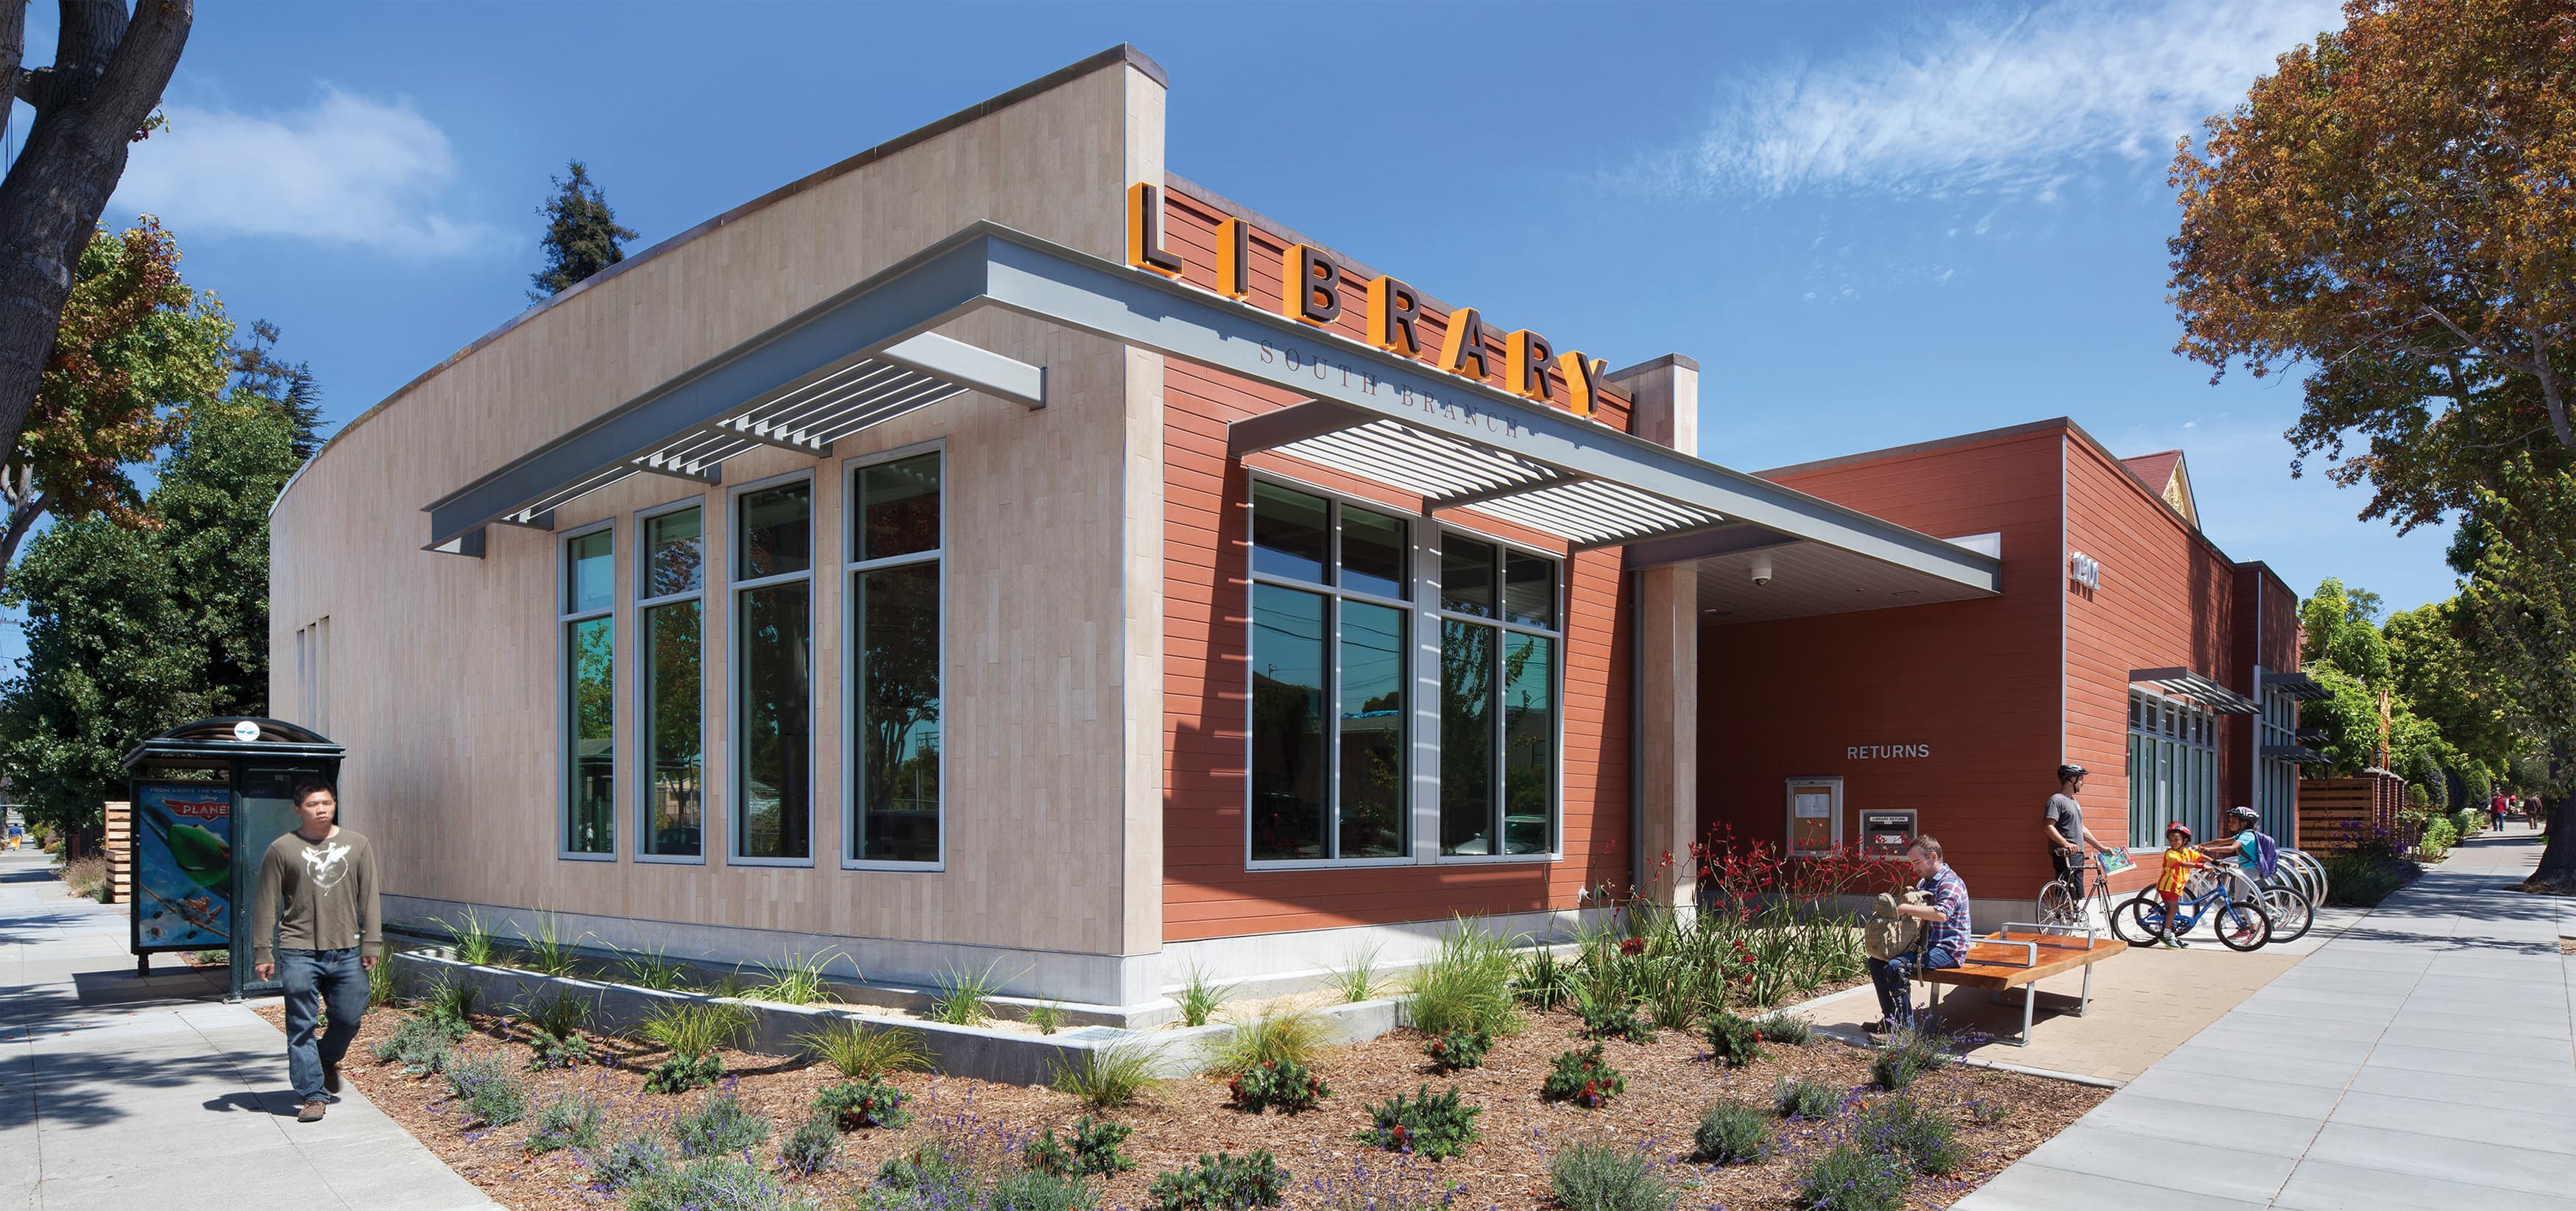 Berkeley Public Library South Branch. Our team developed a friendly and informative system of signage and placemaking elements in both the interior and exterior, our scope included identity and wayfinding signage.